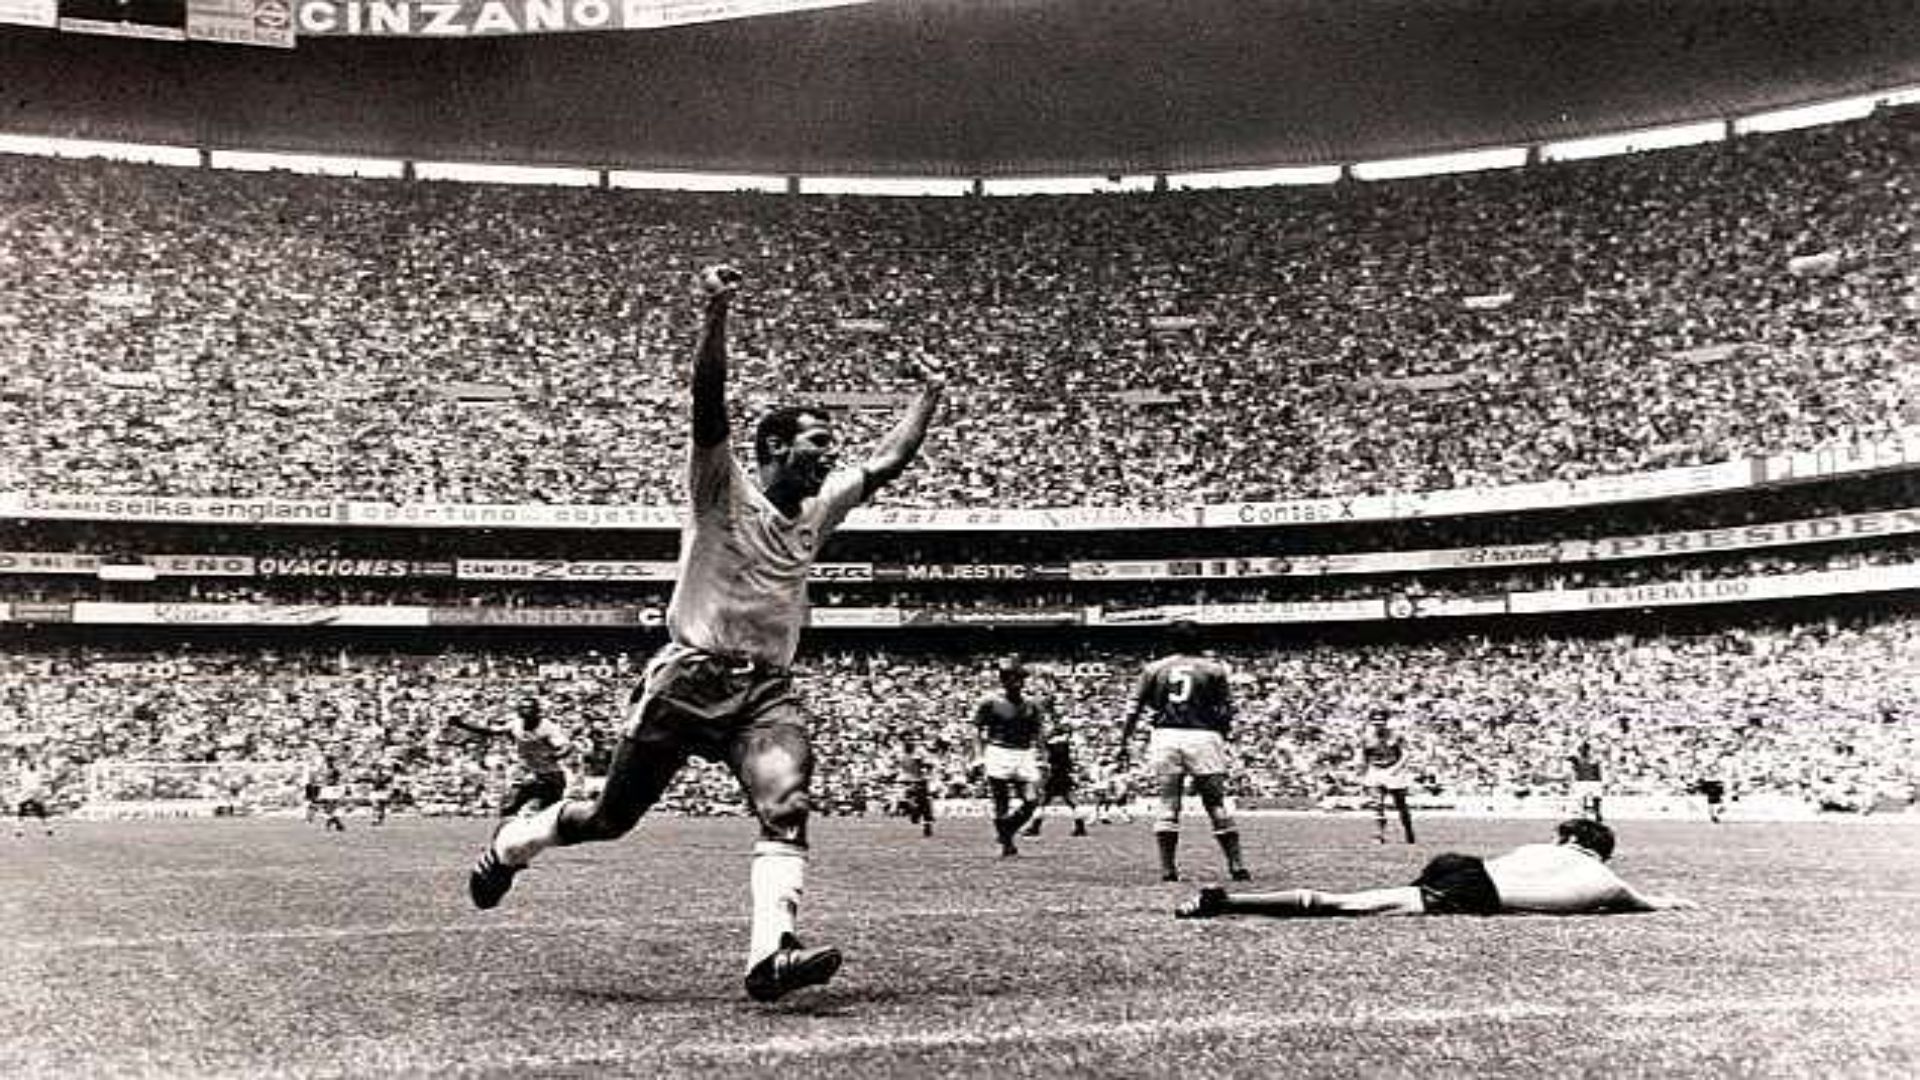 Carlos Alberto captained the all-conquering side of 1970.